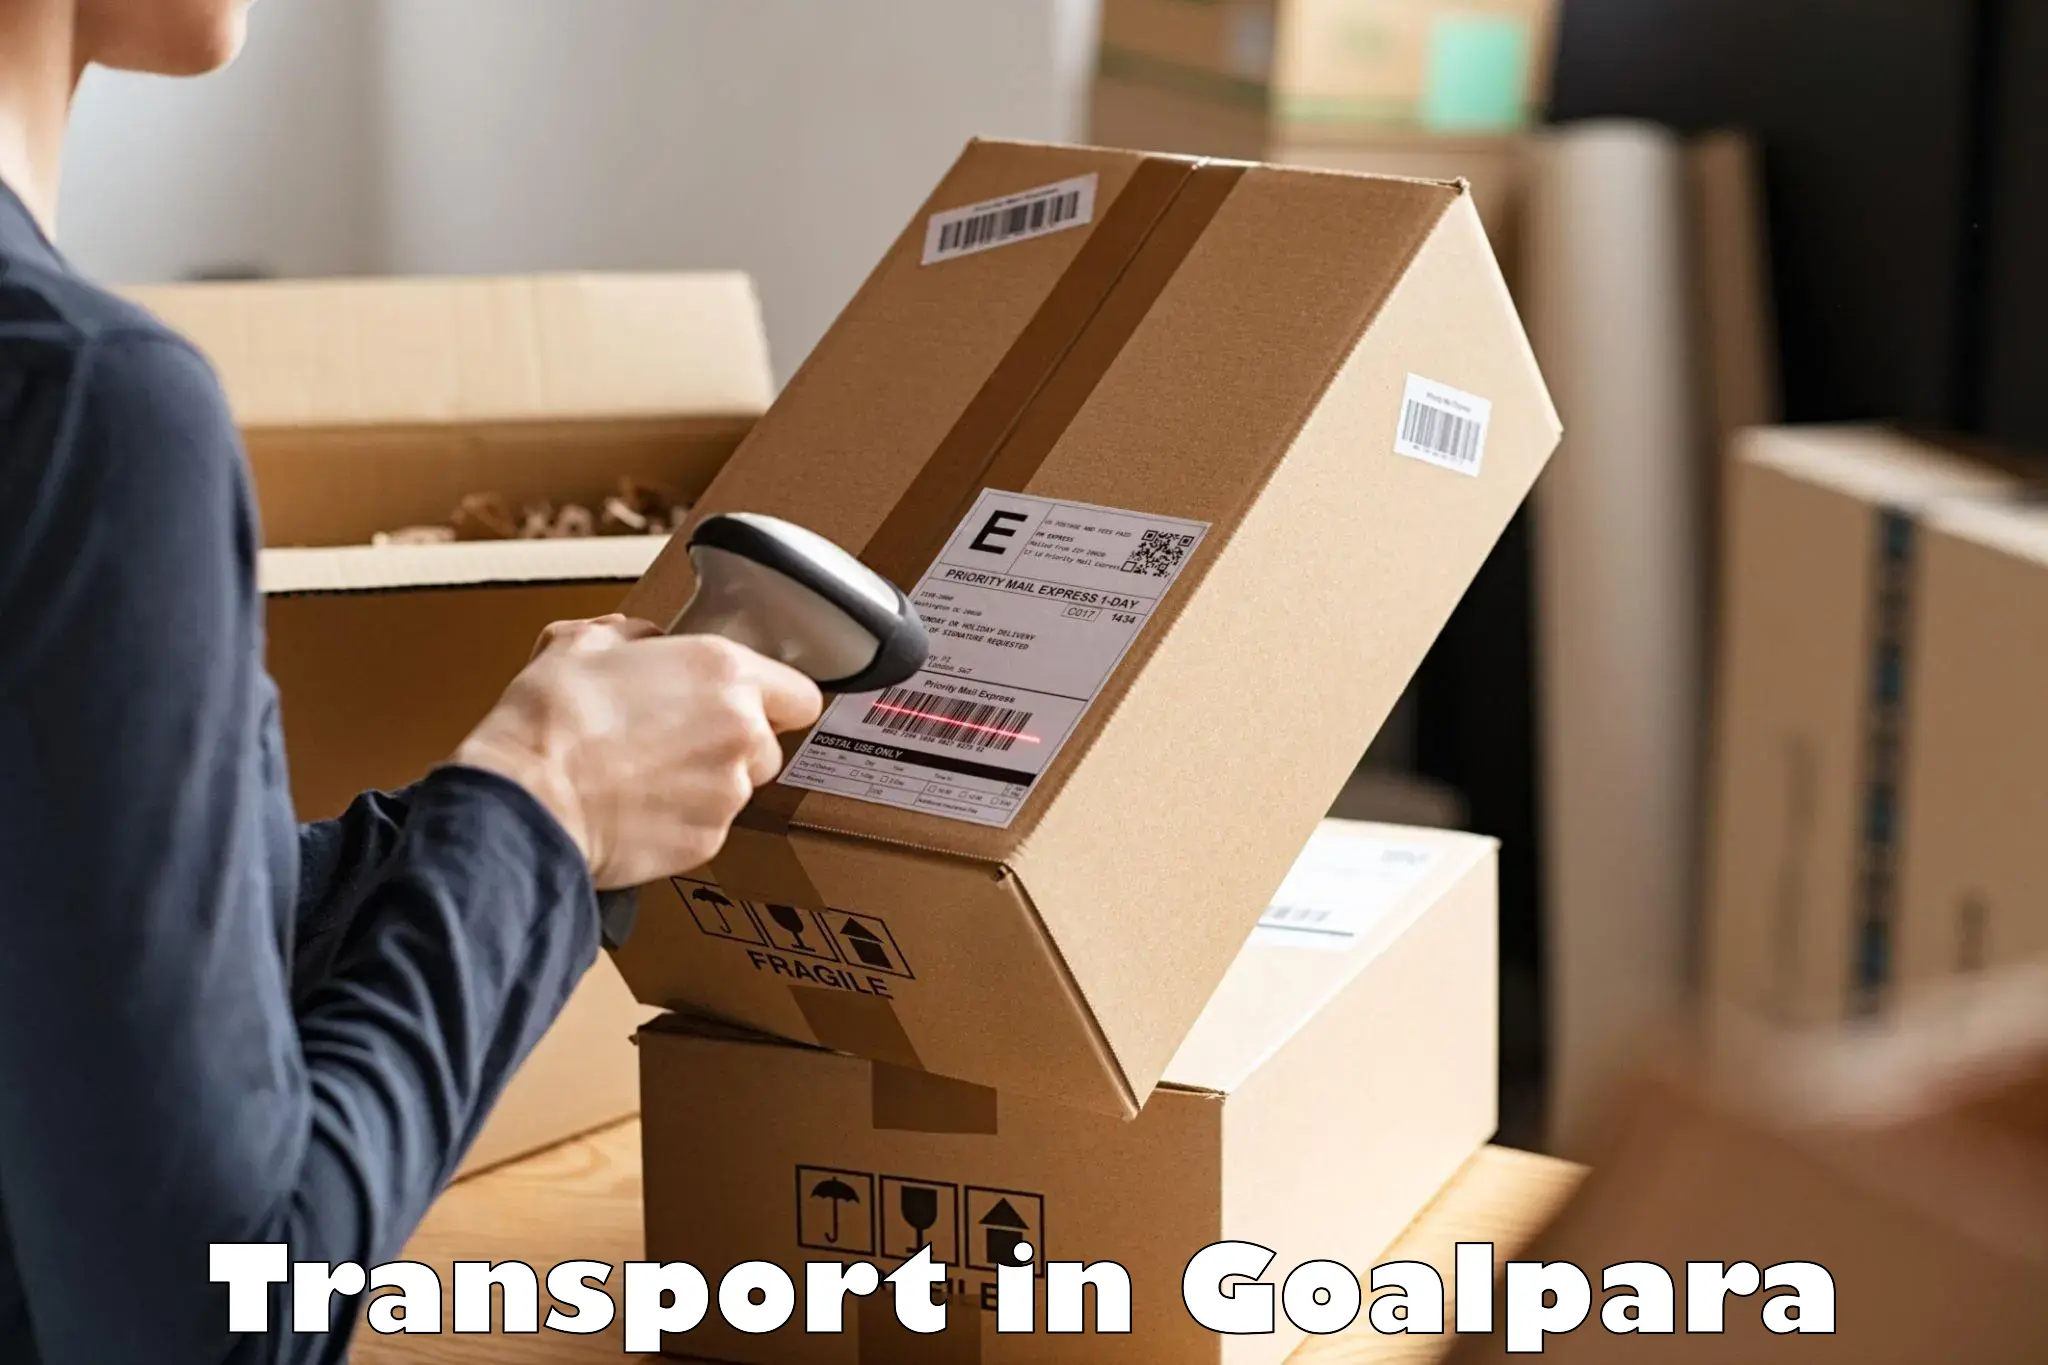 Vehicle transport services in Goalpara